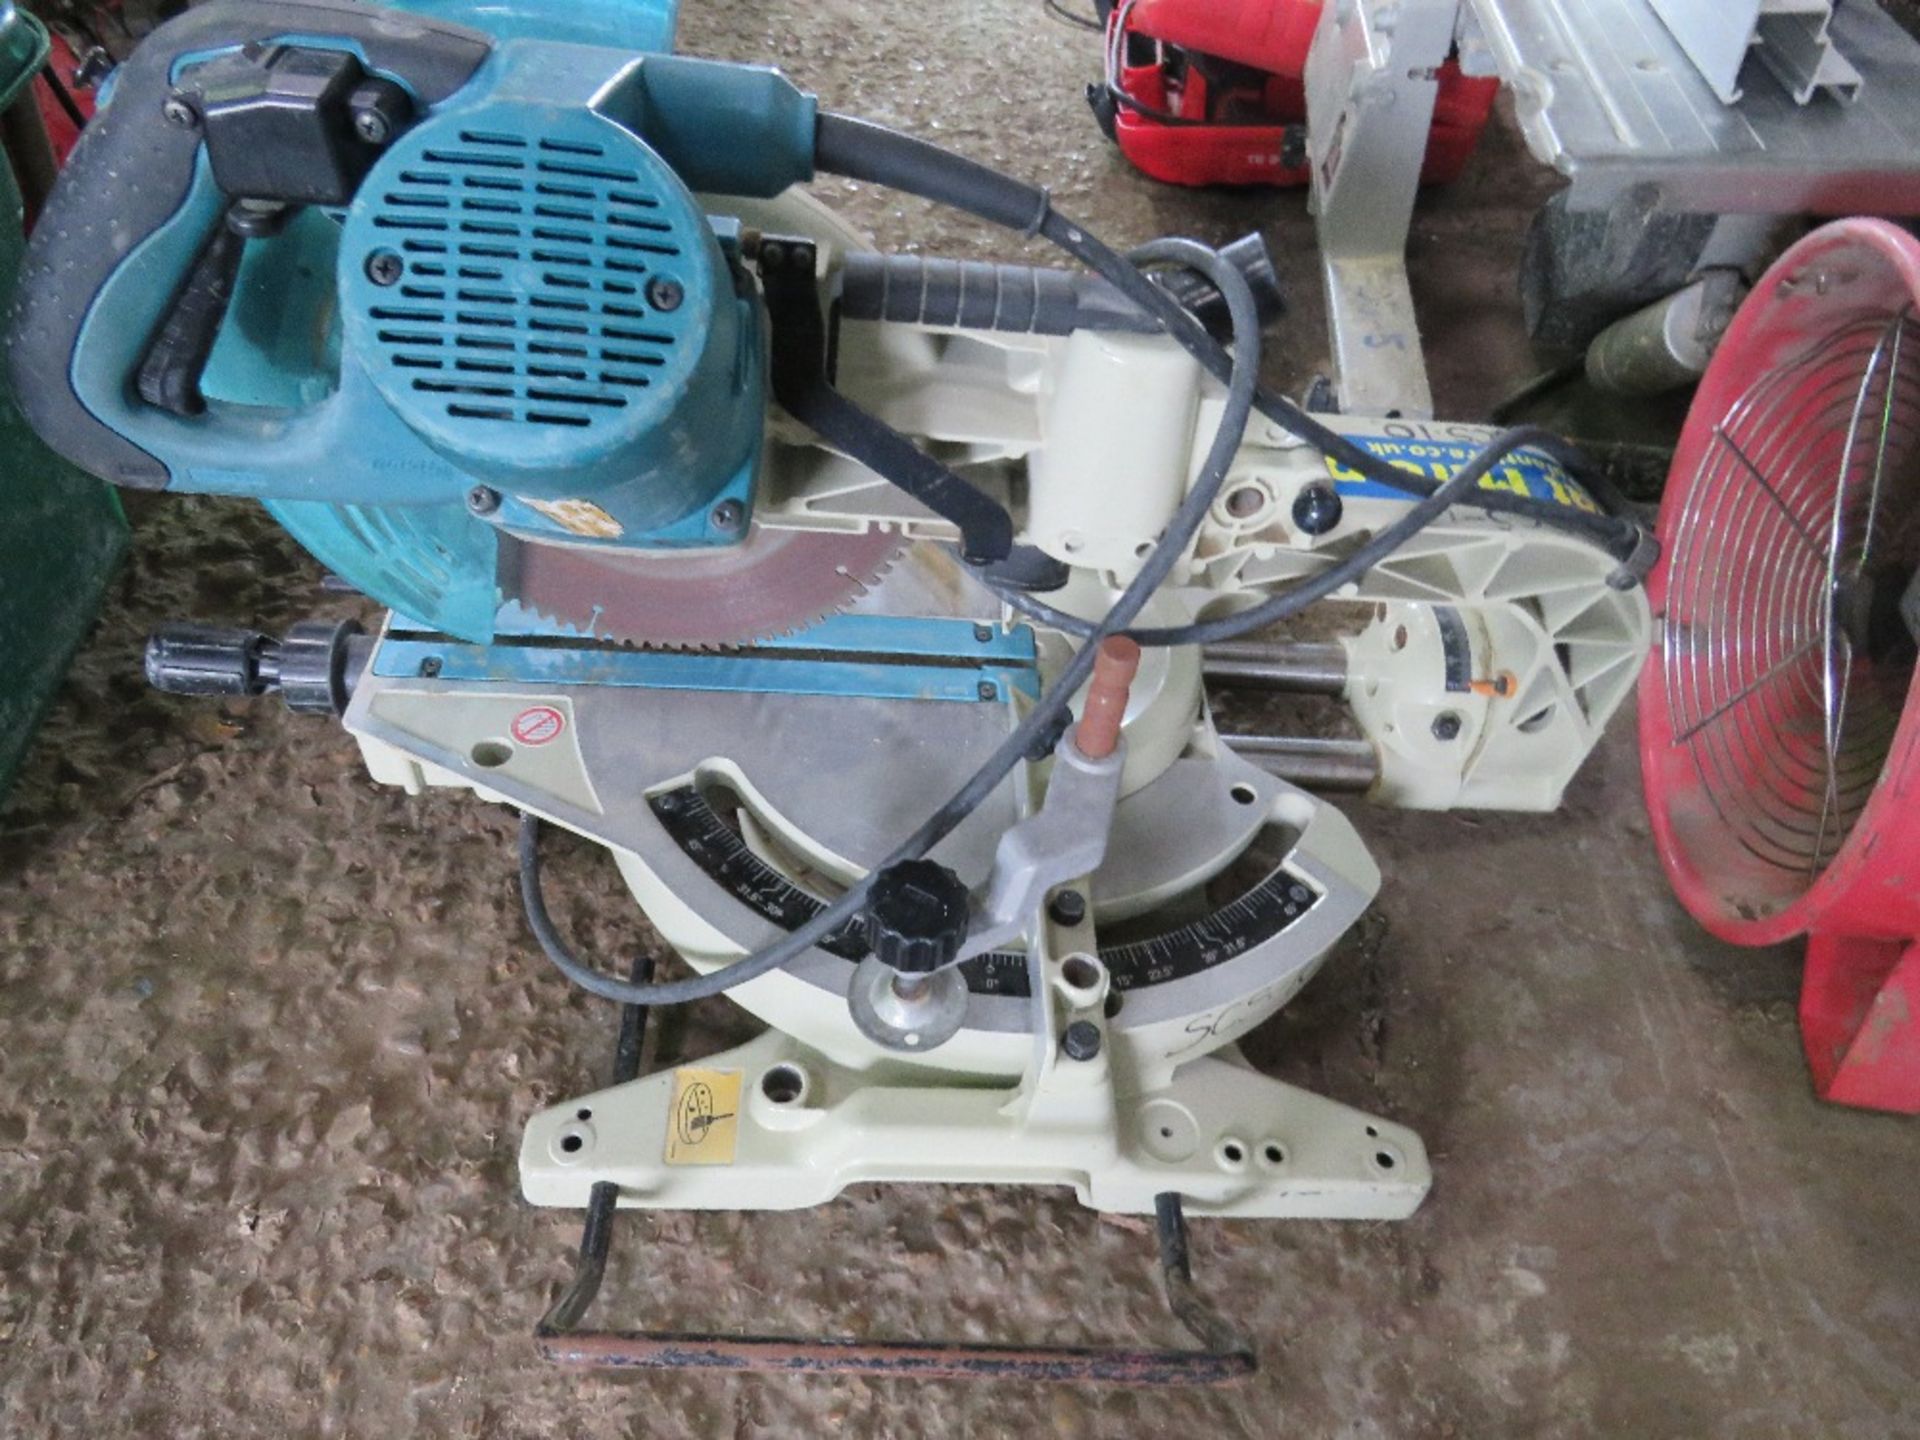 MAKITA 110VOLT CROSS CUT MITRE SAW. UNTESTED, CONDITION UNKNOWN. - Image 3 of 3